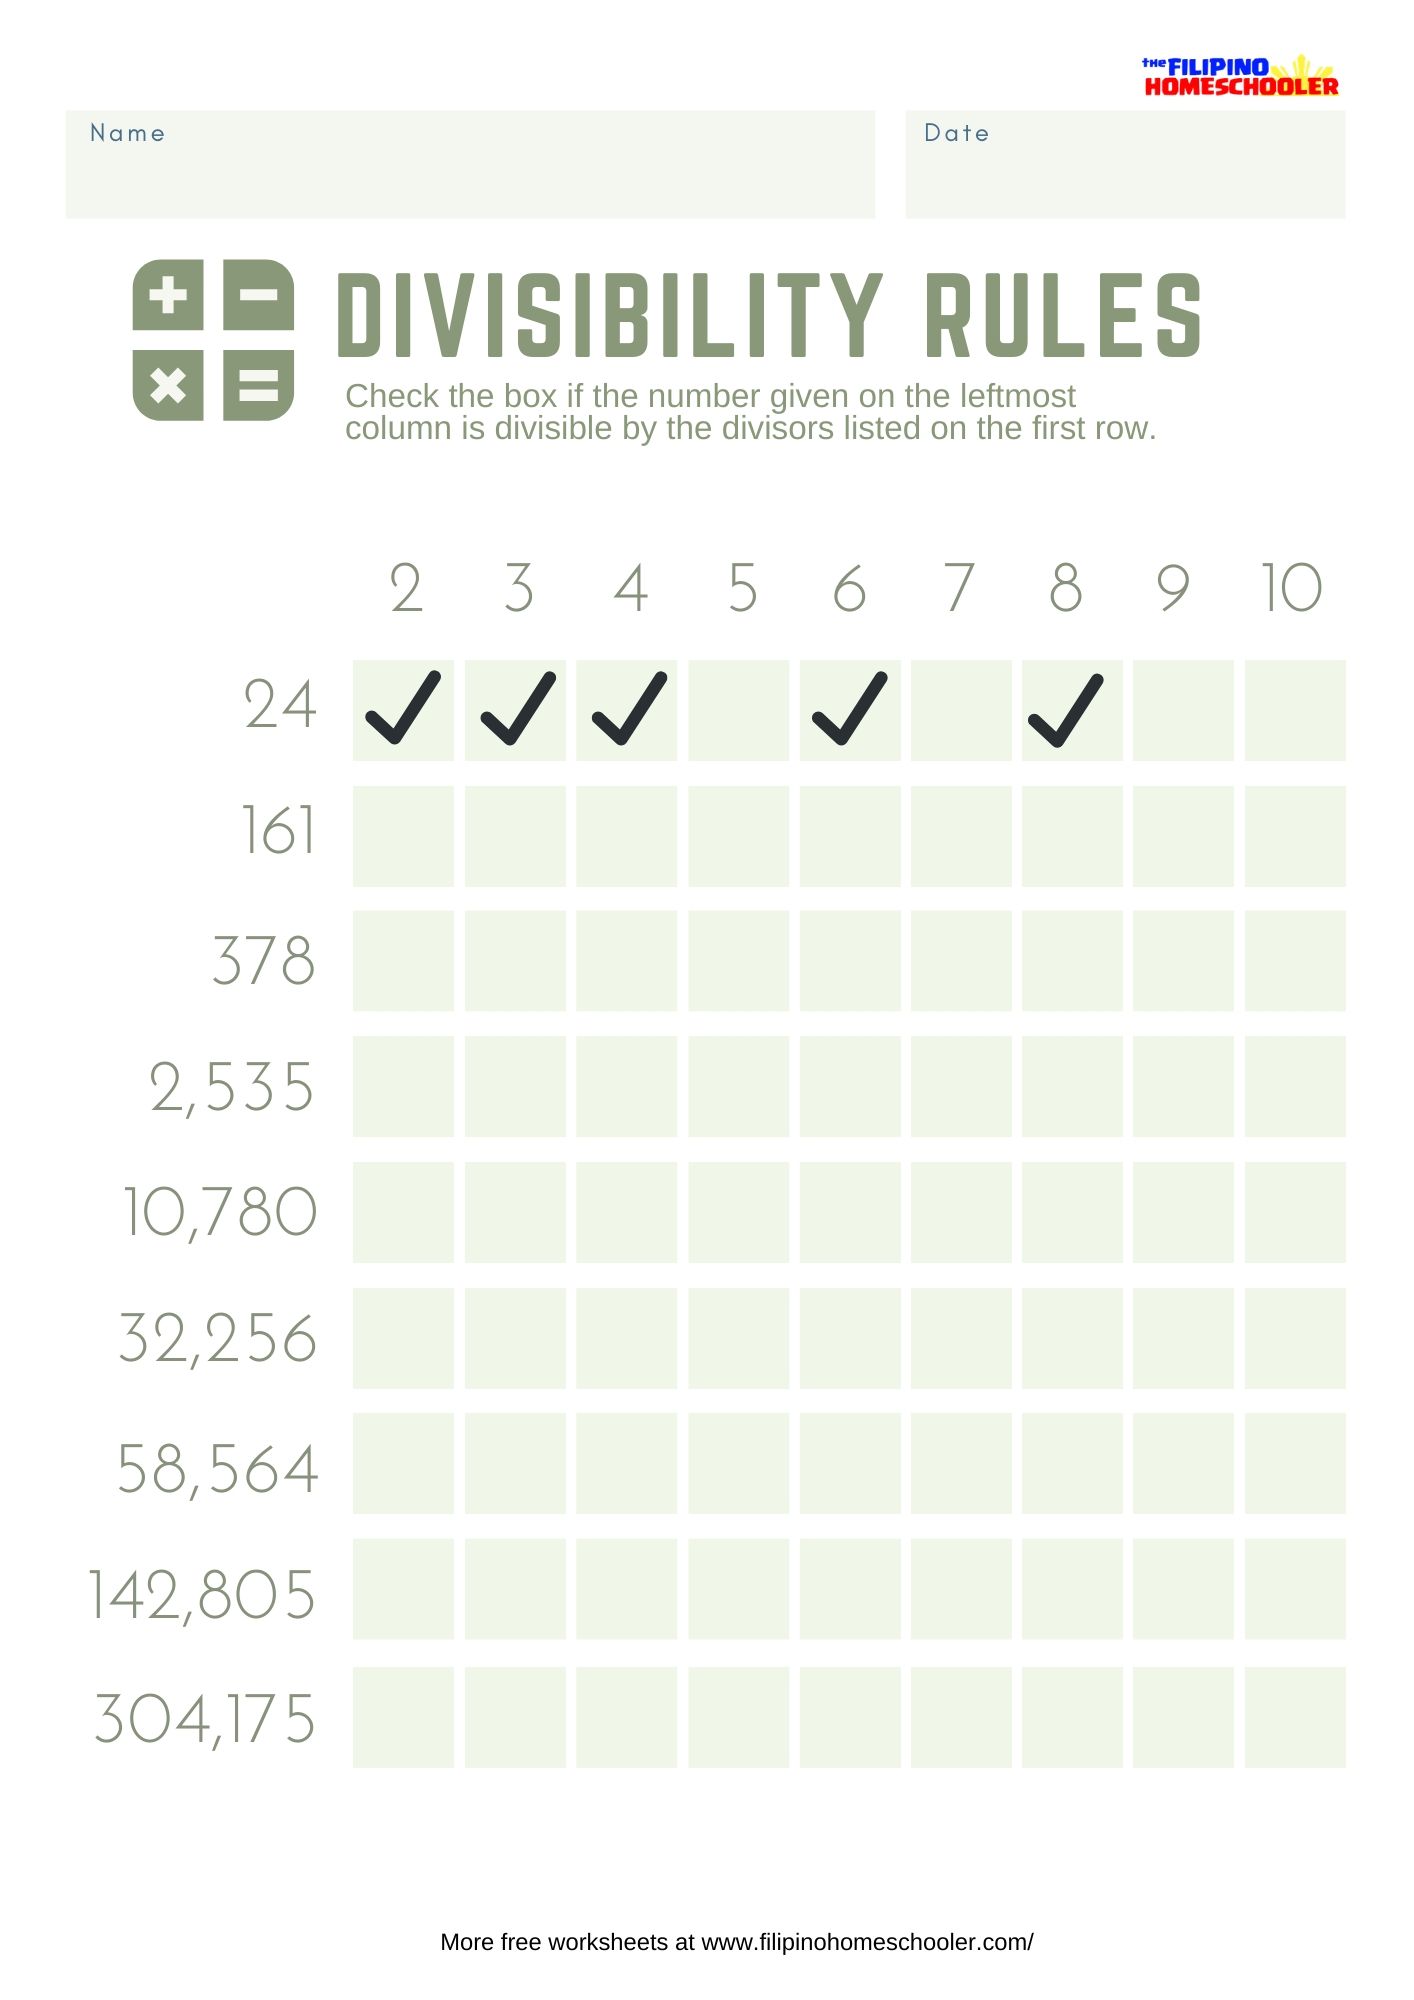 Divisibility Rules Worksheets Set 2 The Filipino Homeschooler